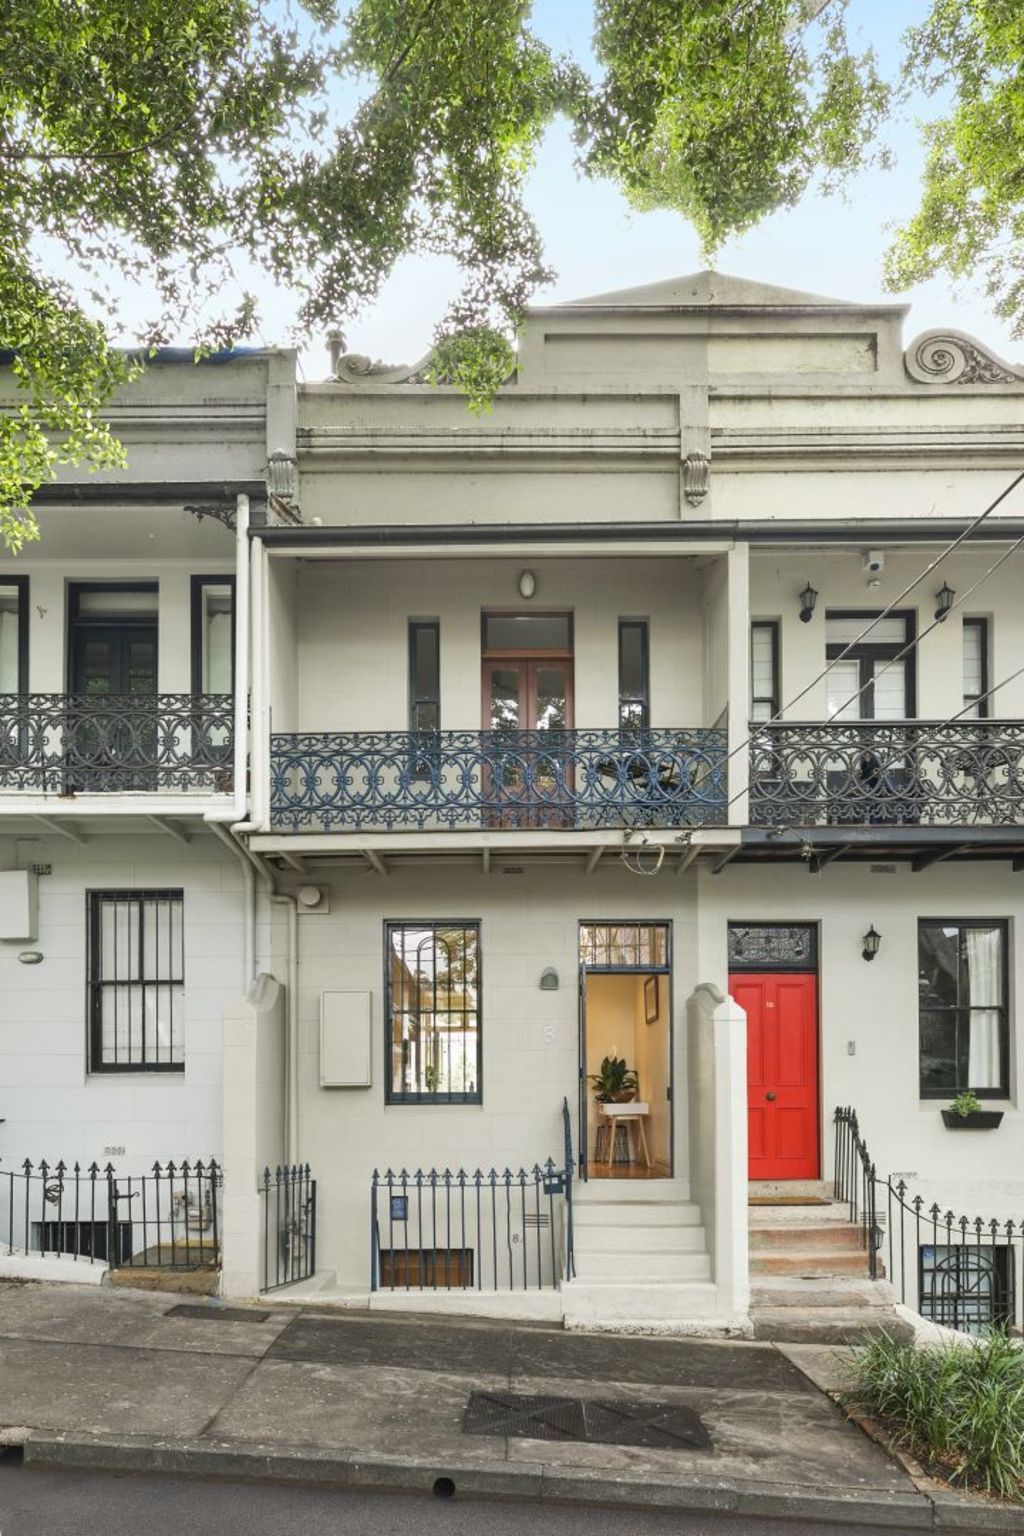 The Paddington terrace sold before auction after competition from two buyers.